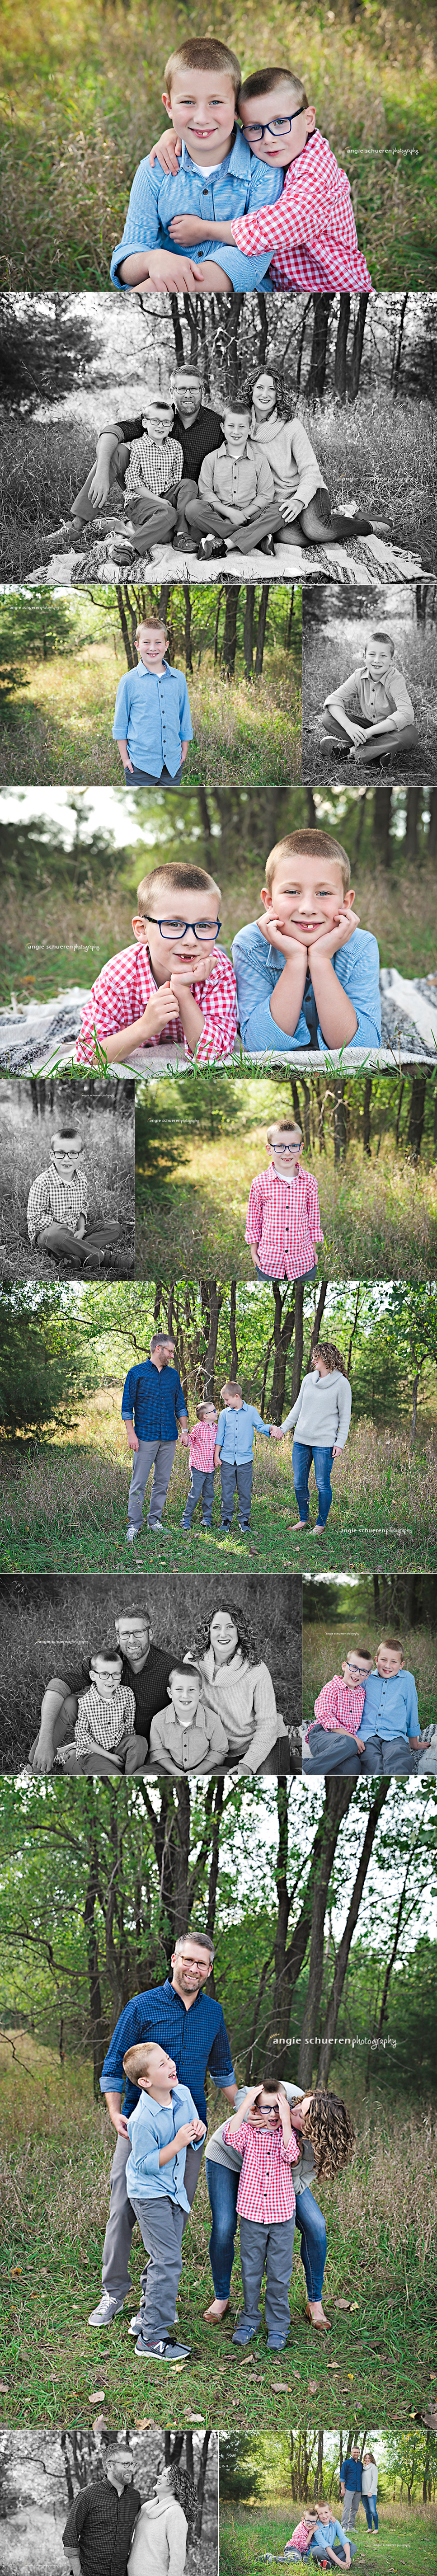 MN Family photography